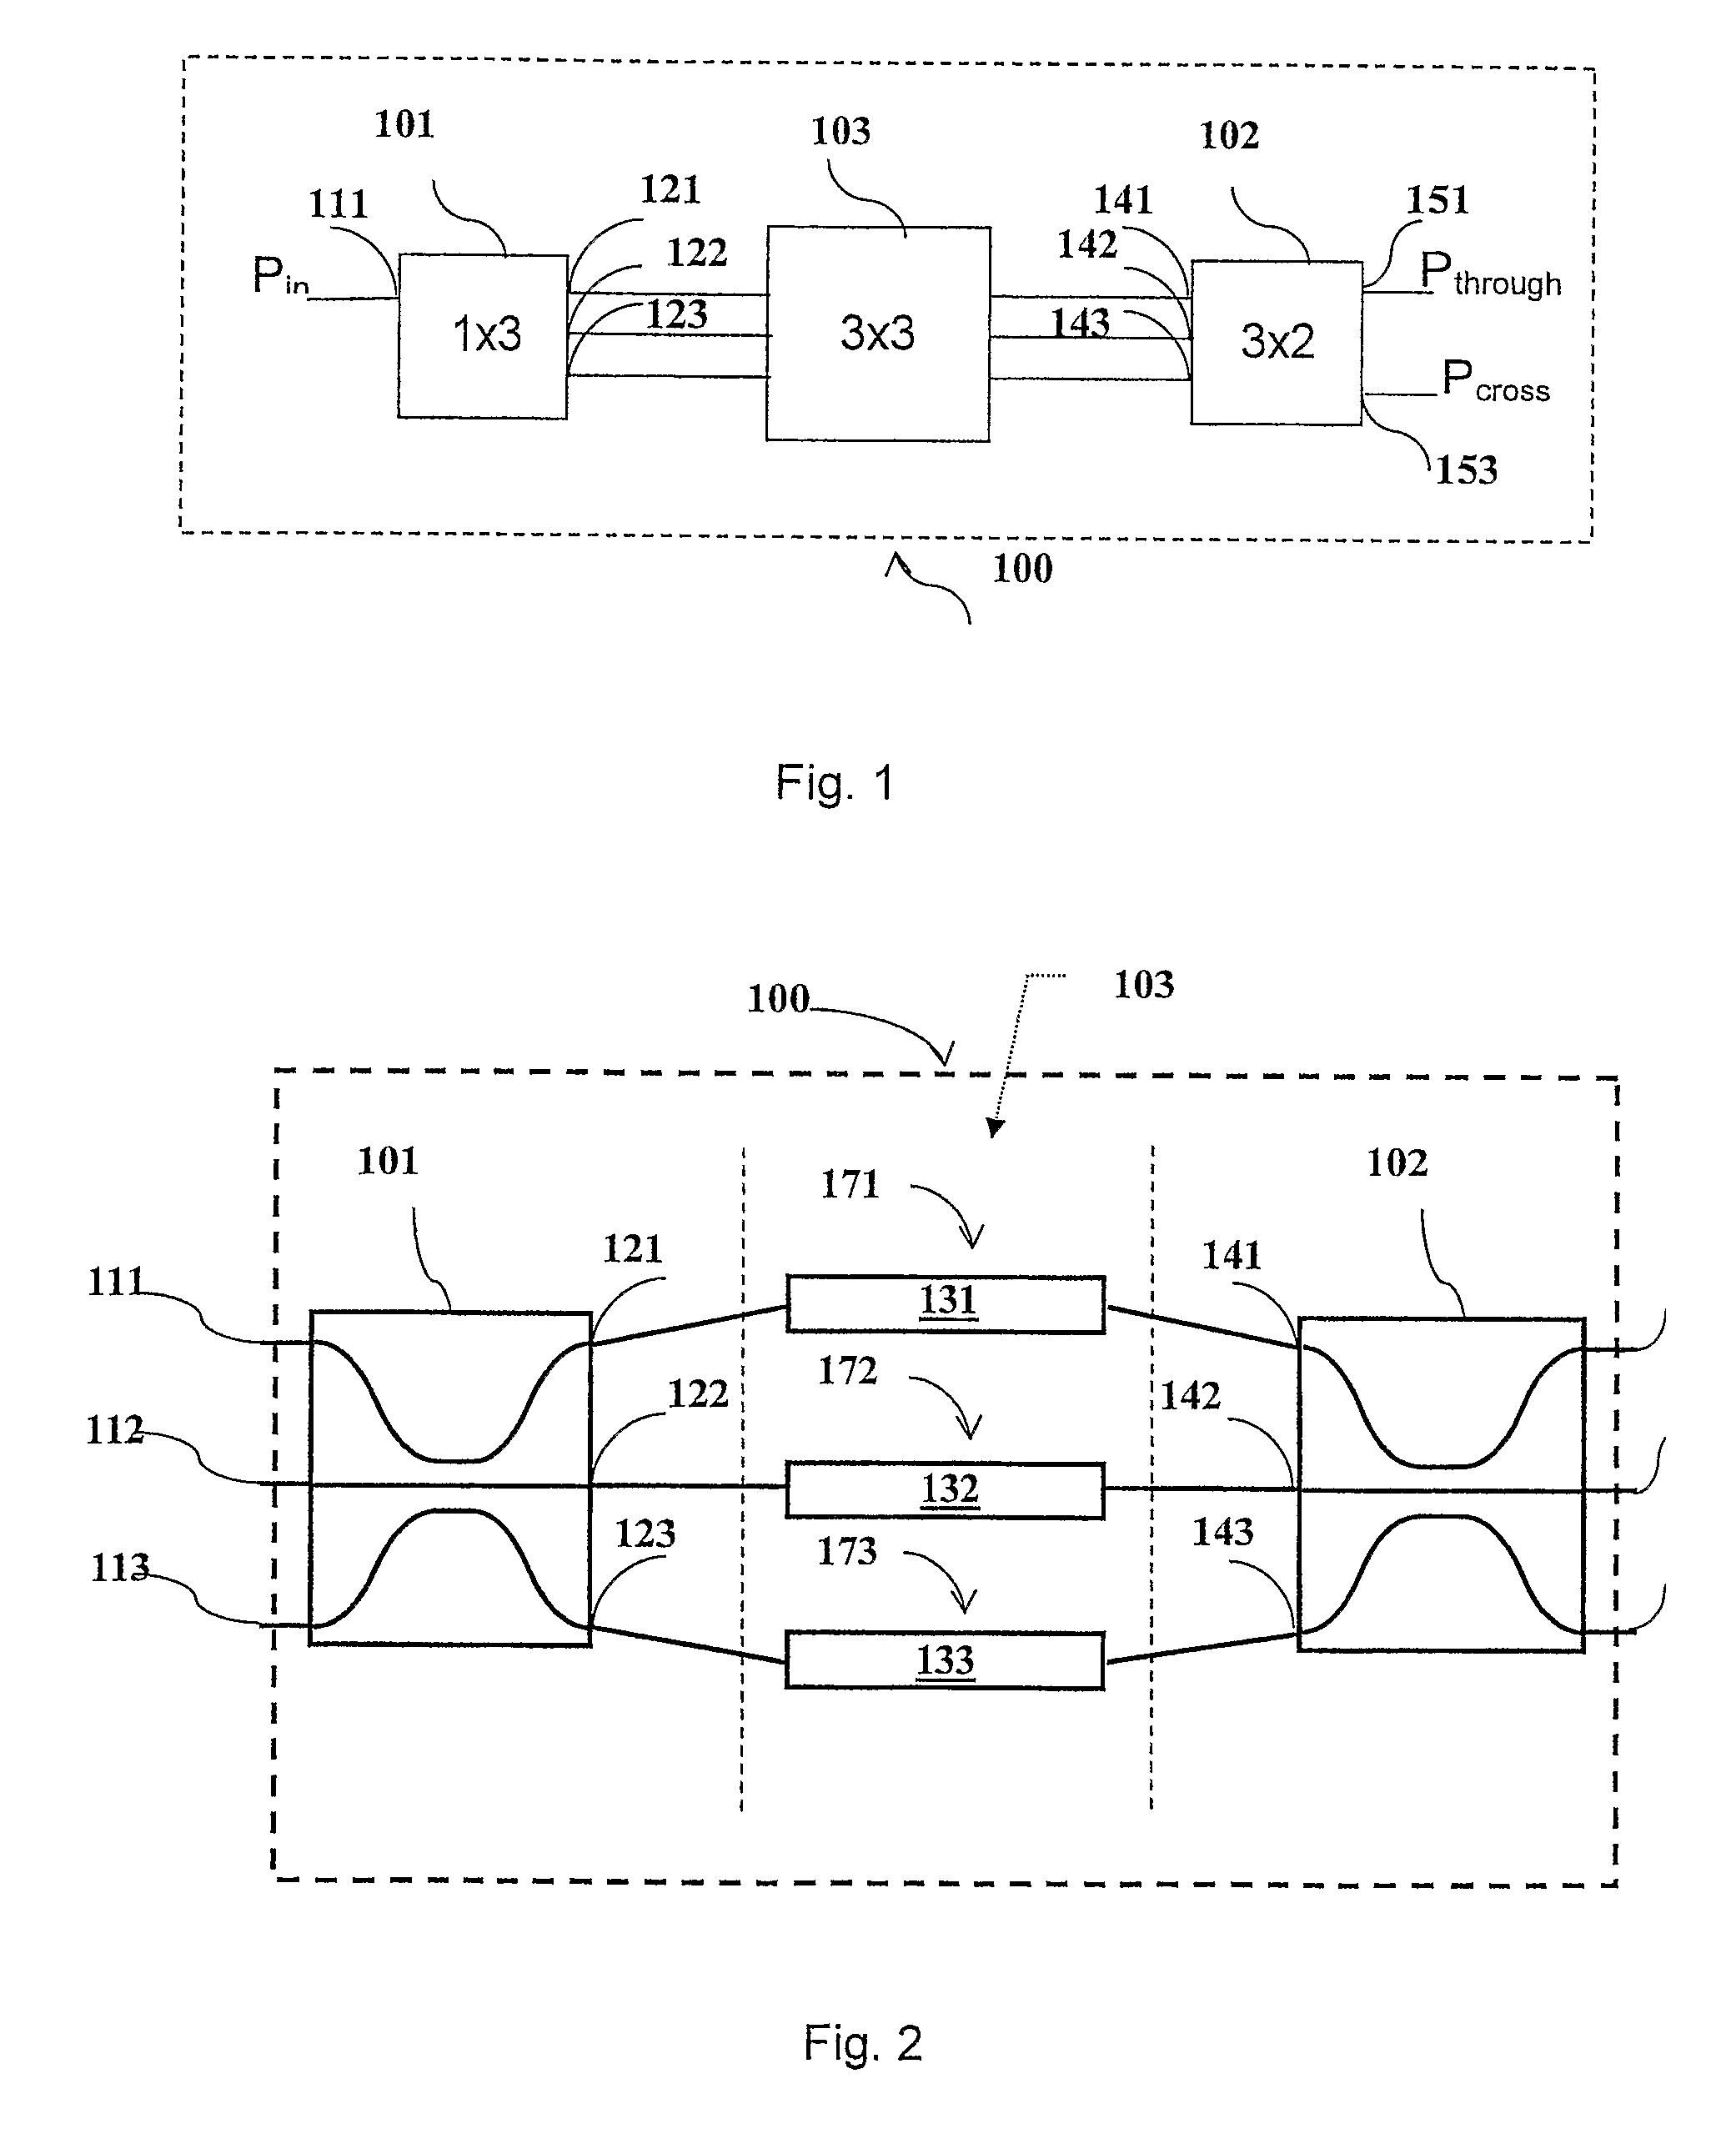 Optical band splitter/combiner device comprising a three-arms interferometer